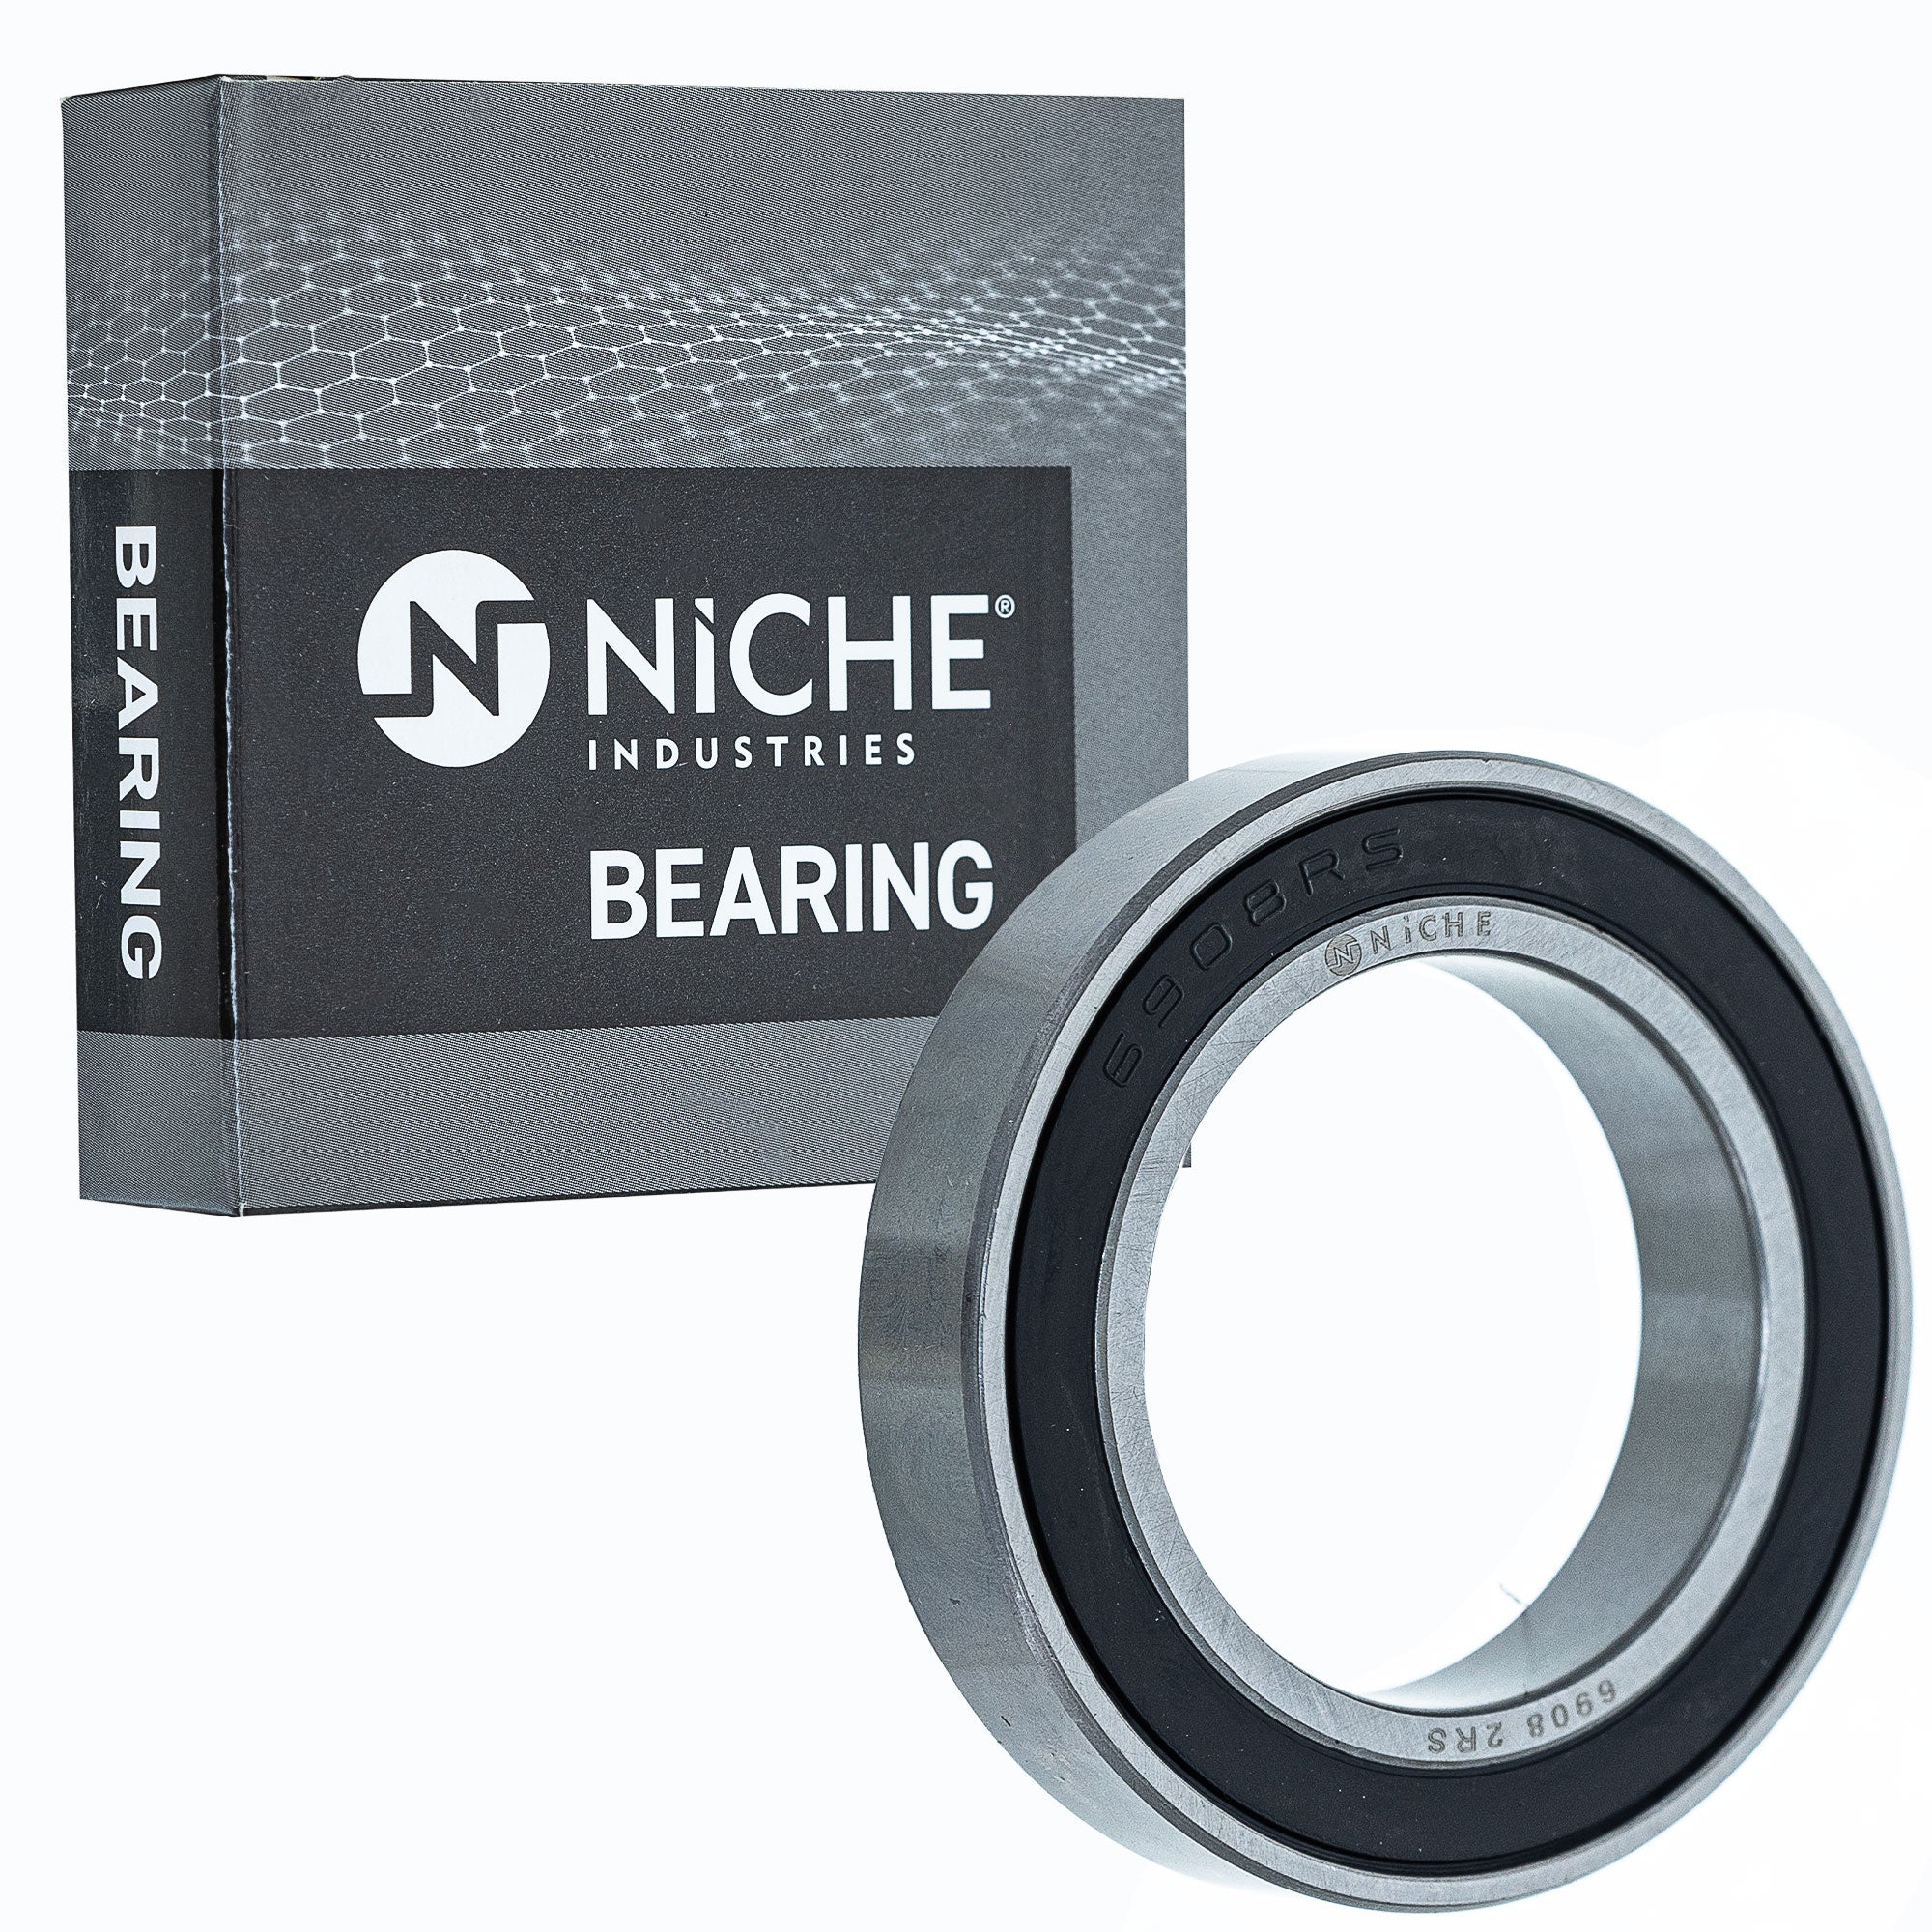 NICHE 519-CBB2248R Bearing 2-Pack for zOTHER BRP Can-Am Ski-Doo